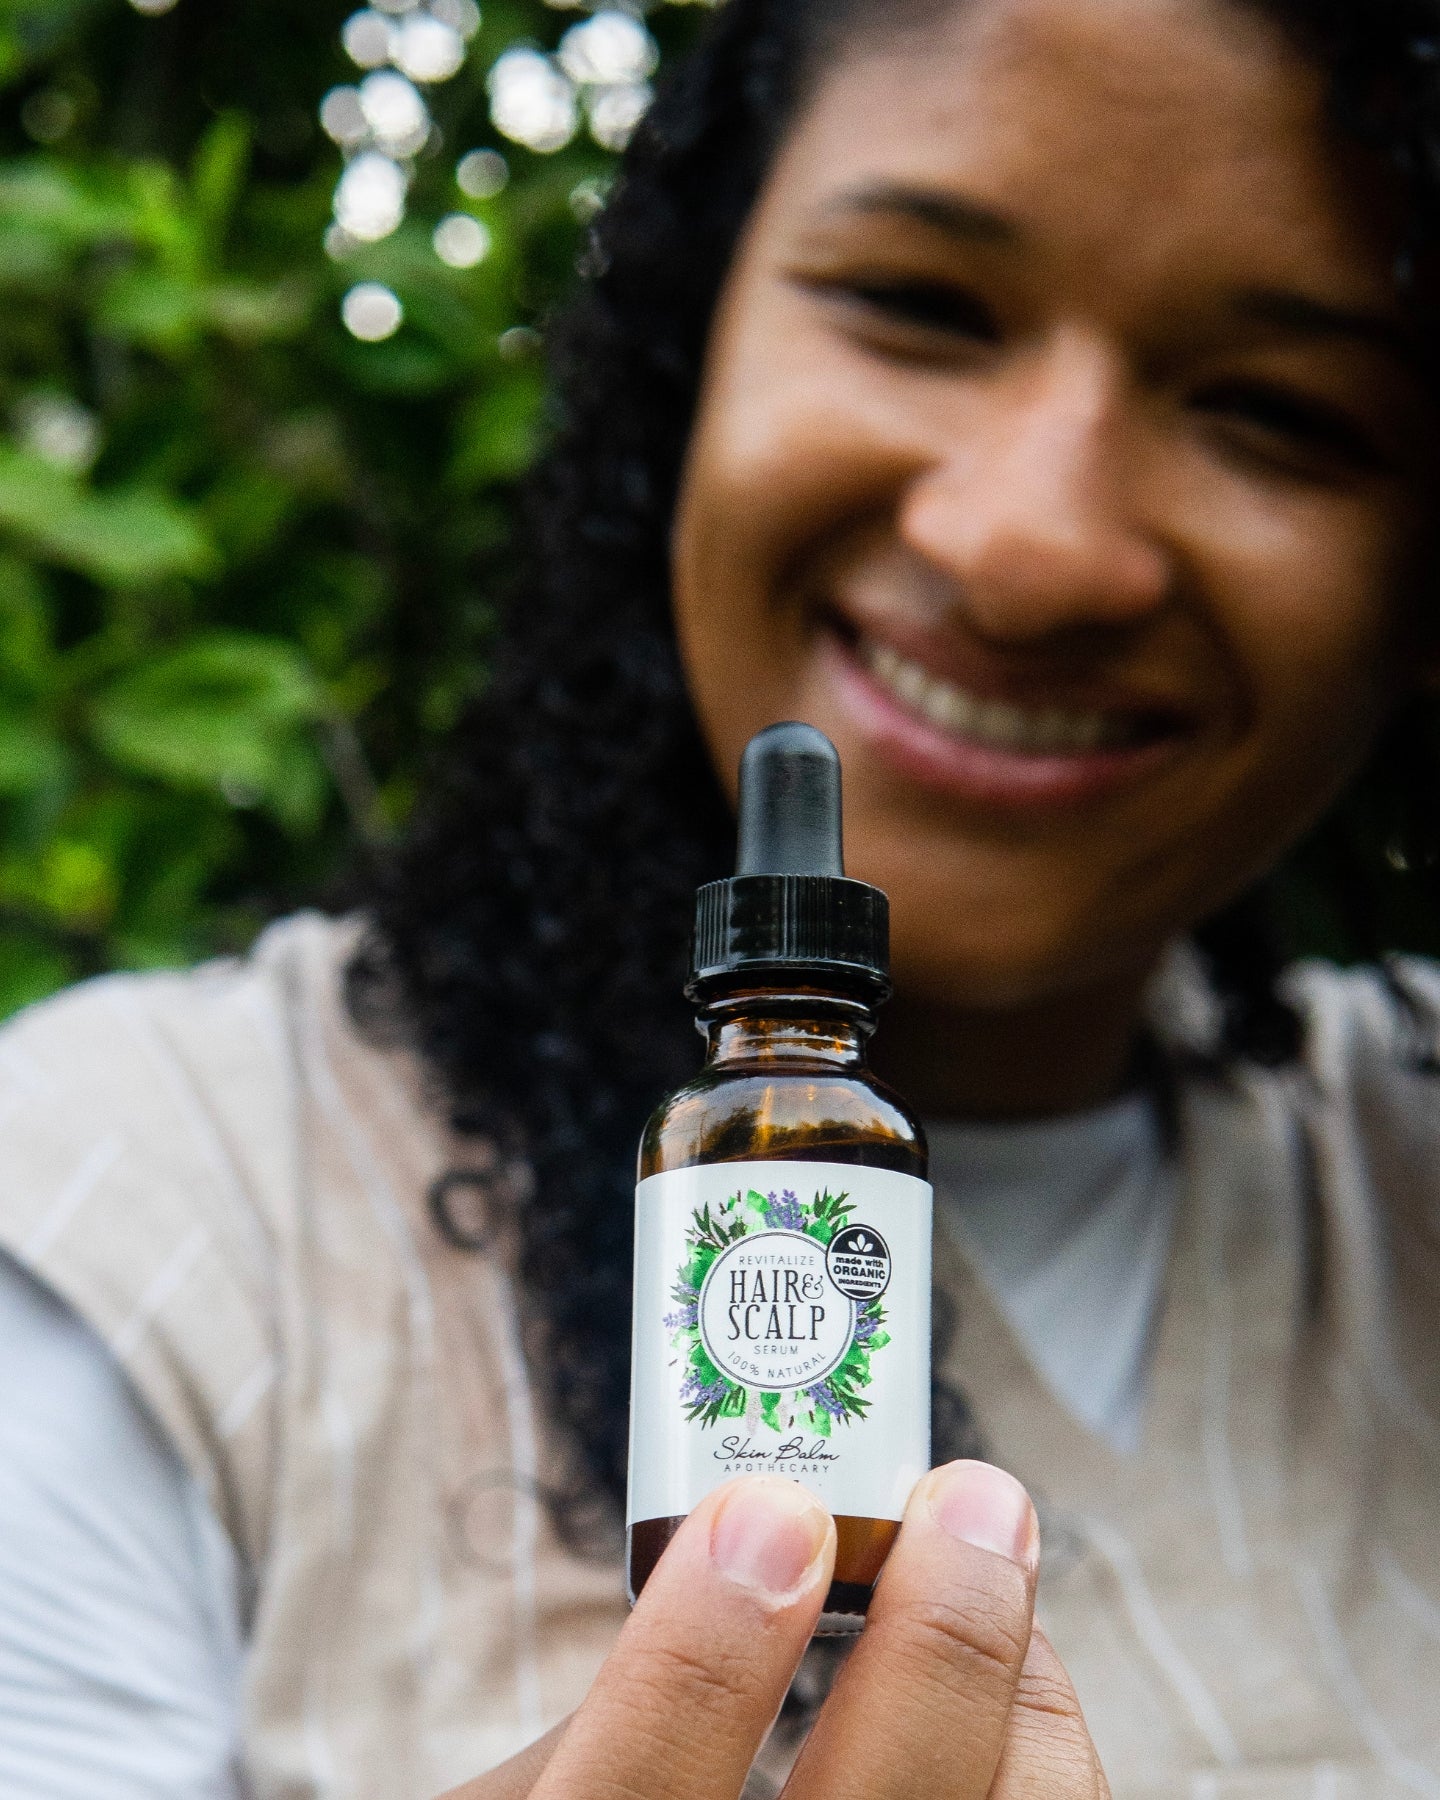 Revitalize Hair & Scalp Serum focused in the foreground with a smiling woman blurred in the background.